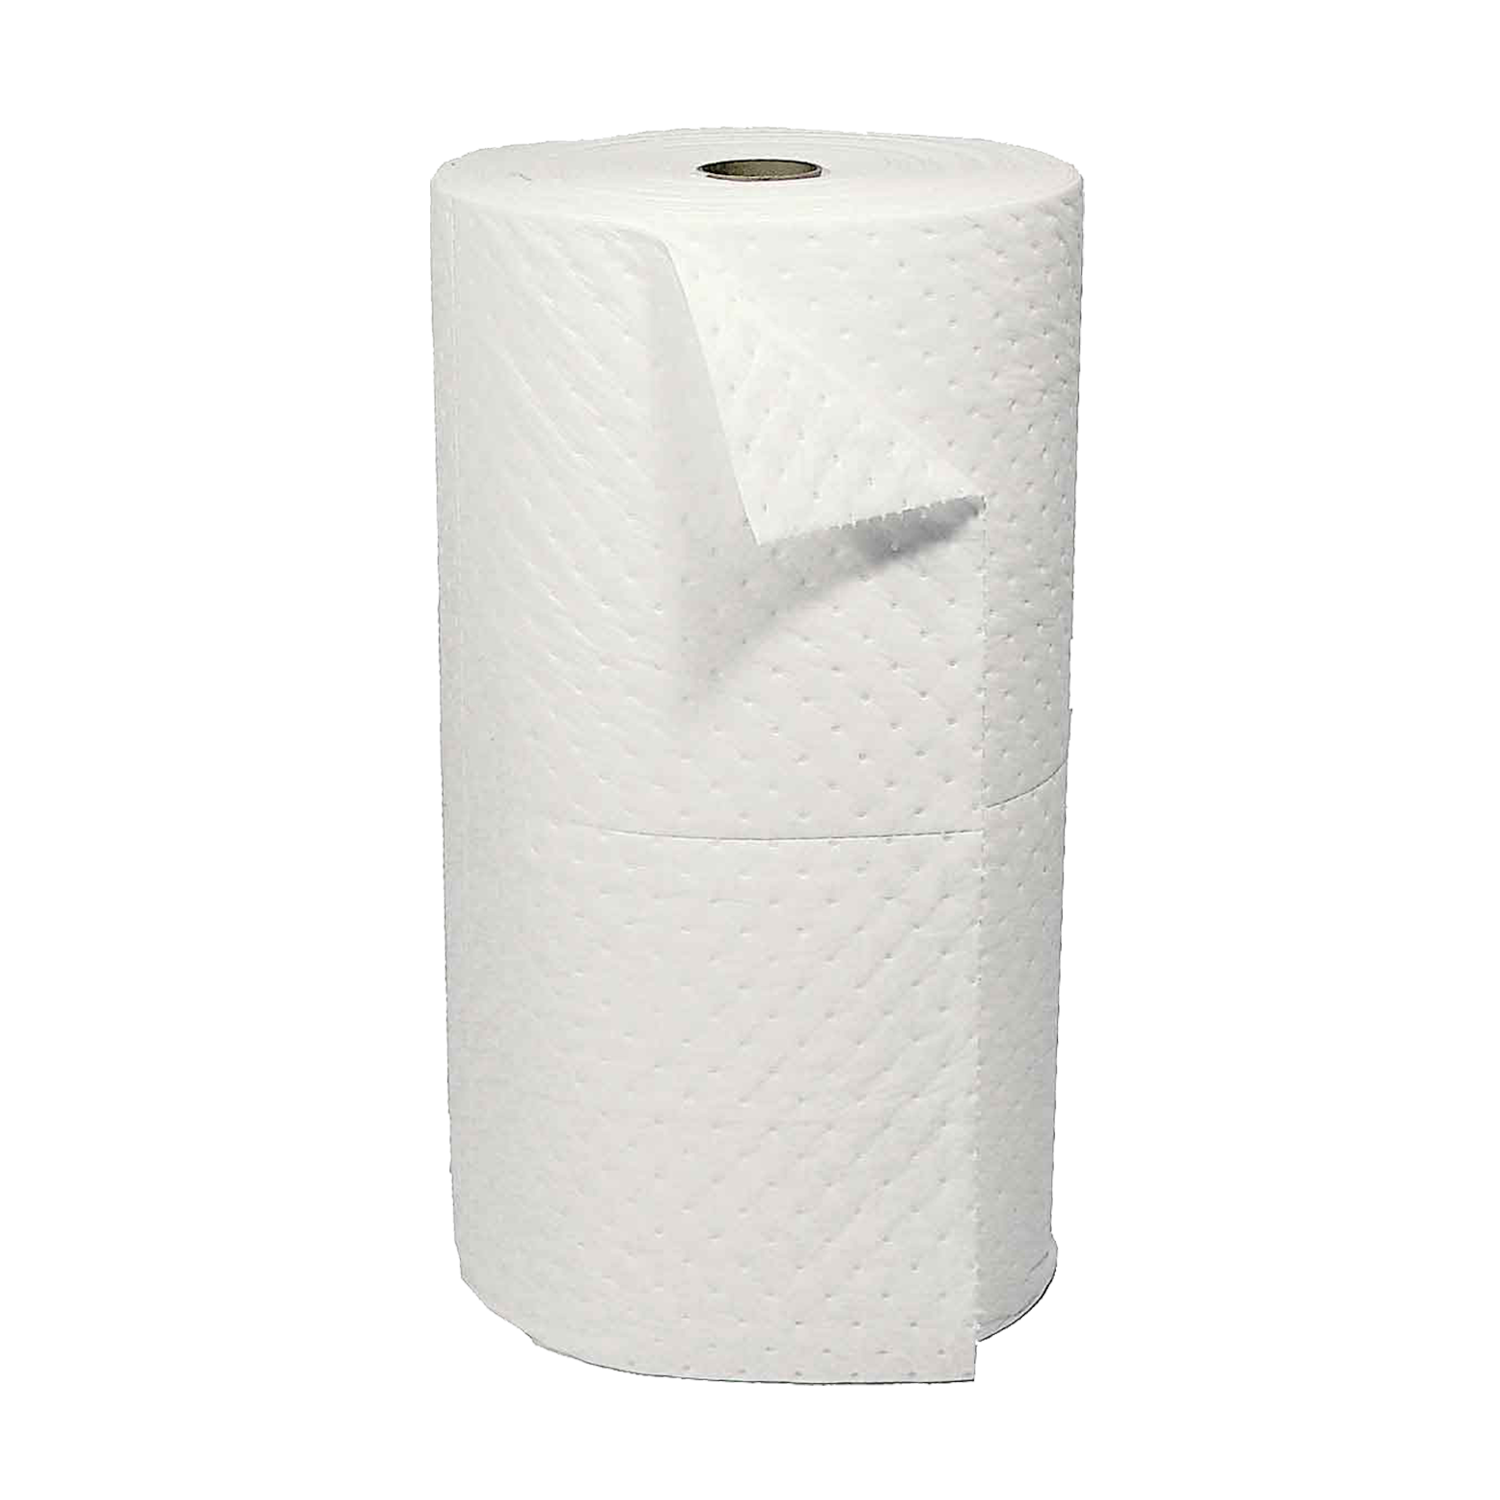 ORL60 Oil Absorbent Roll - Udyogi Safety